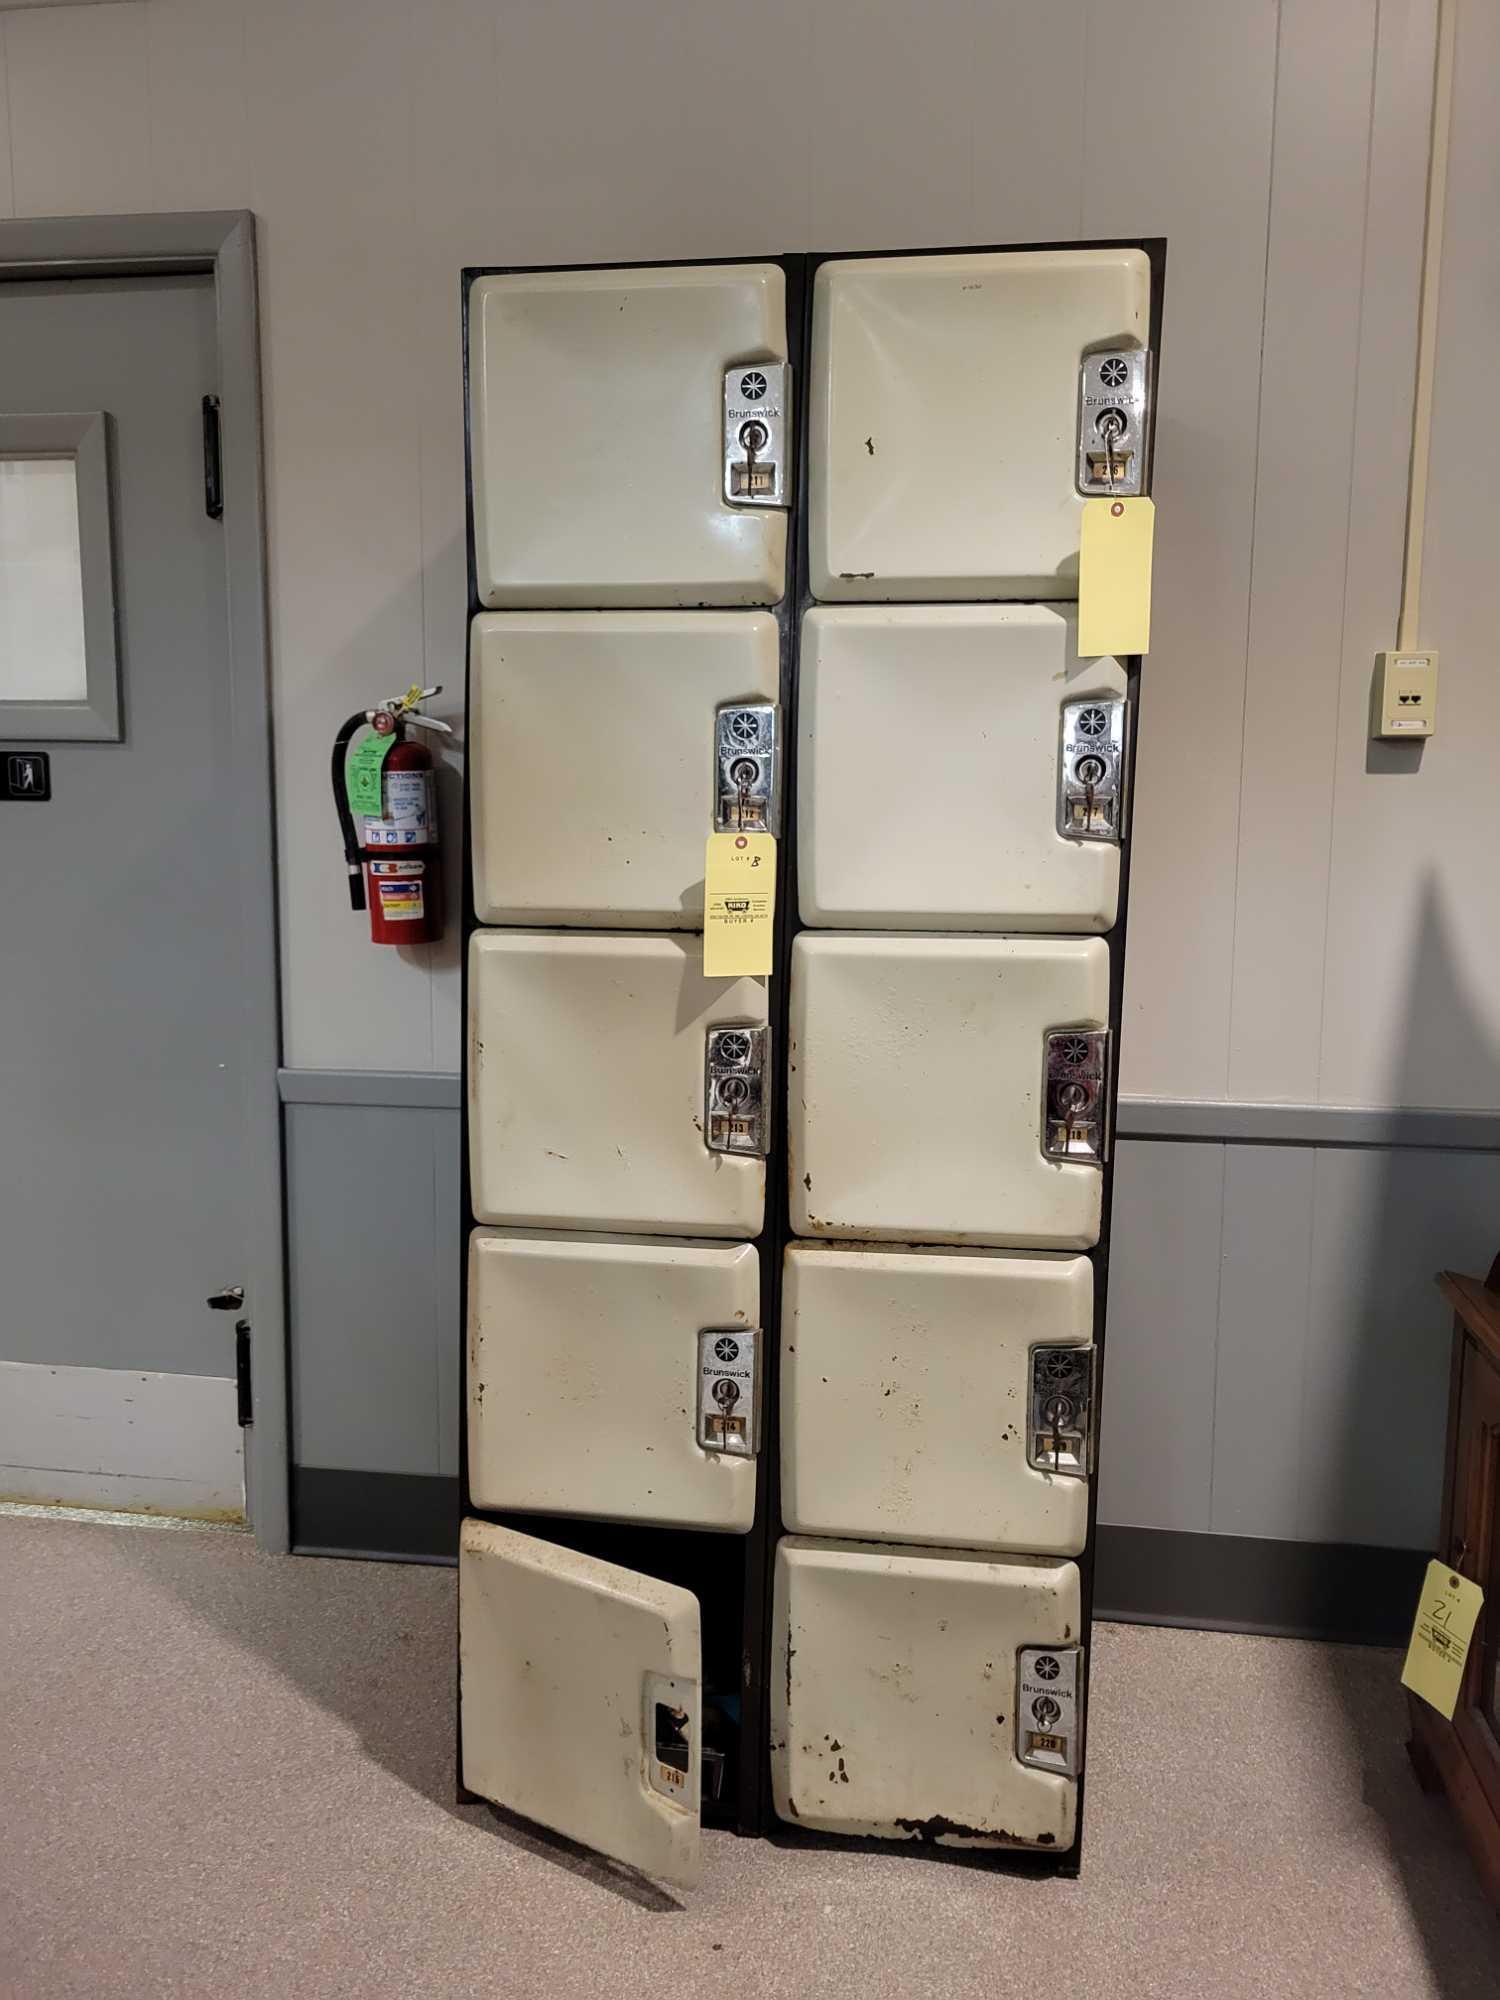 Brunswick 10 door lockers, 9 doors with locks and keys, one lock drilled out